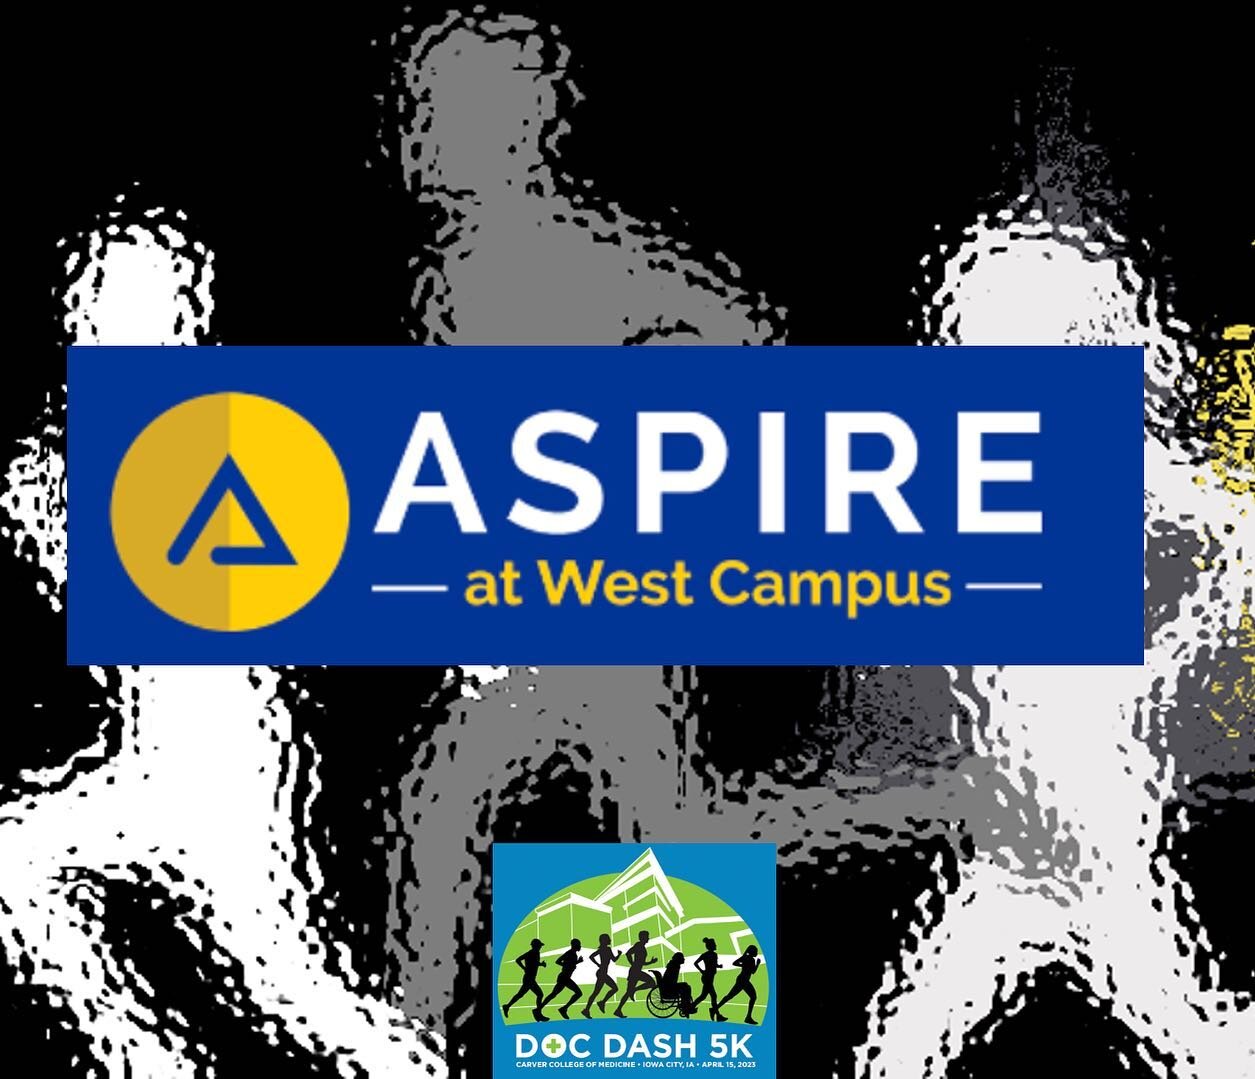 Doc Dash 2023 would not be possible without the help of Aspire at West Campus. We thank them for being a gold tier sponsor in this year&rsquo;s Doc Dash.
 
You can make a difference, too. Sign up for Doc Dash on April 15 by clicking on the link in ou